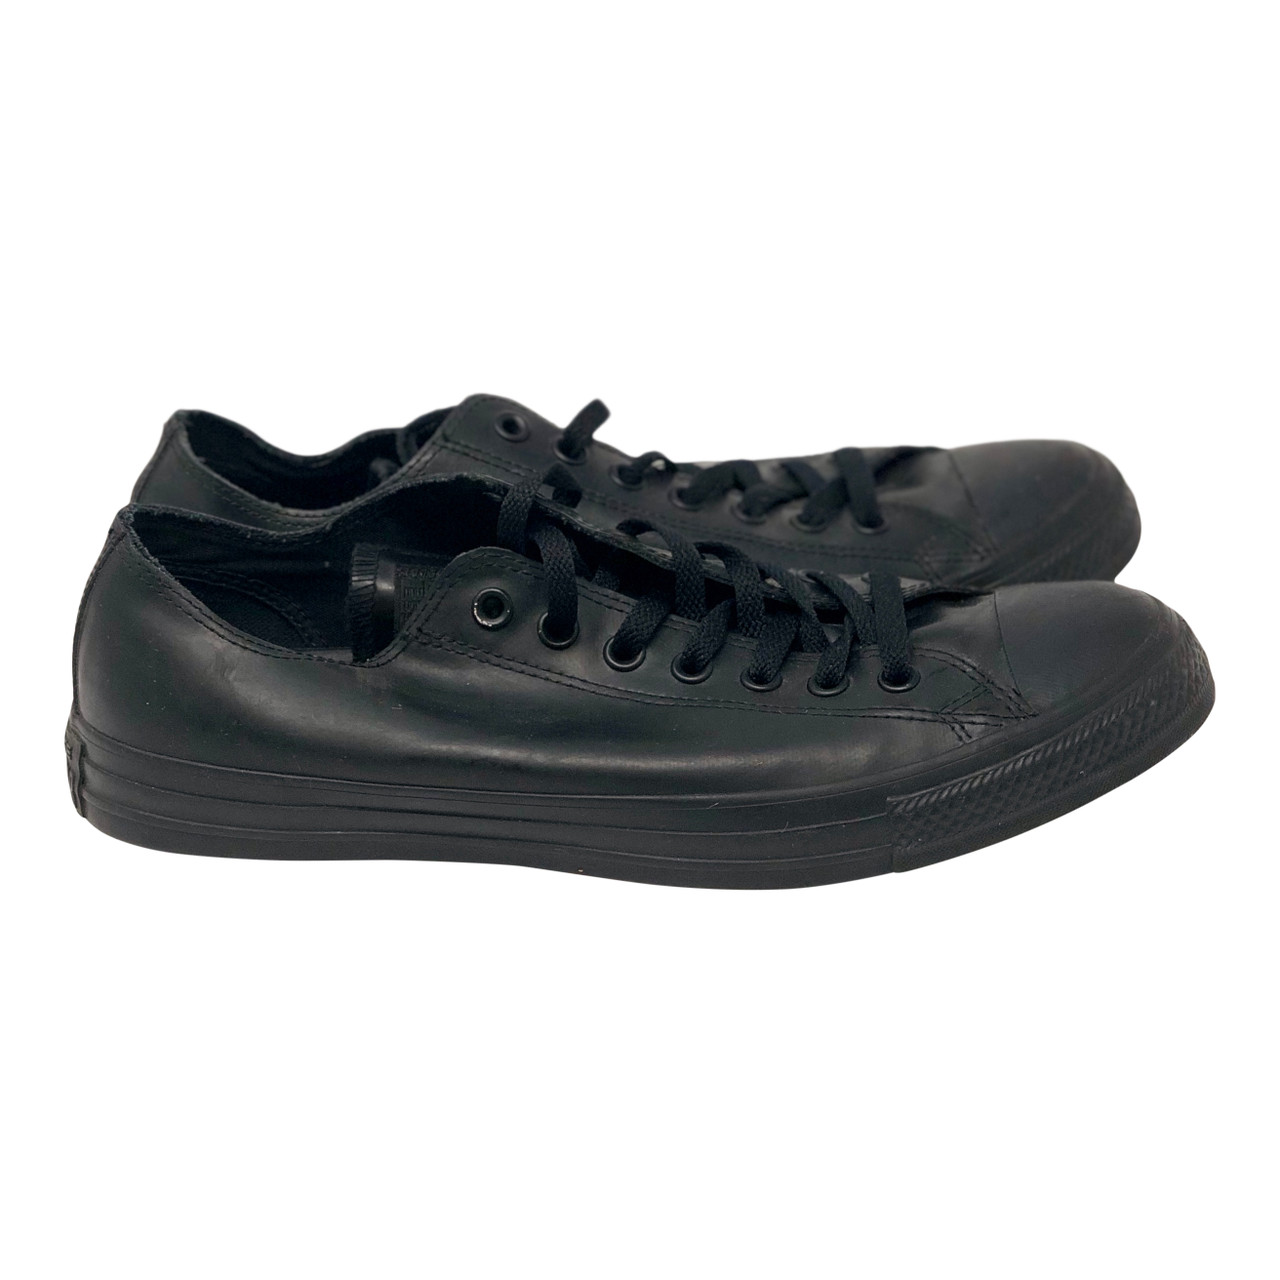 rubber converse low top